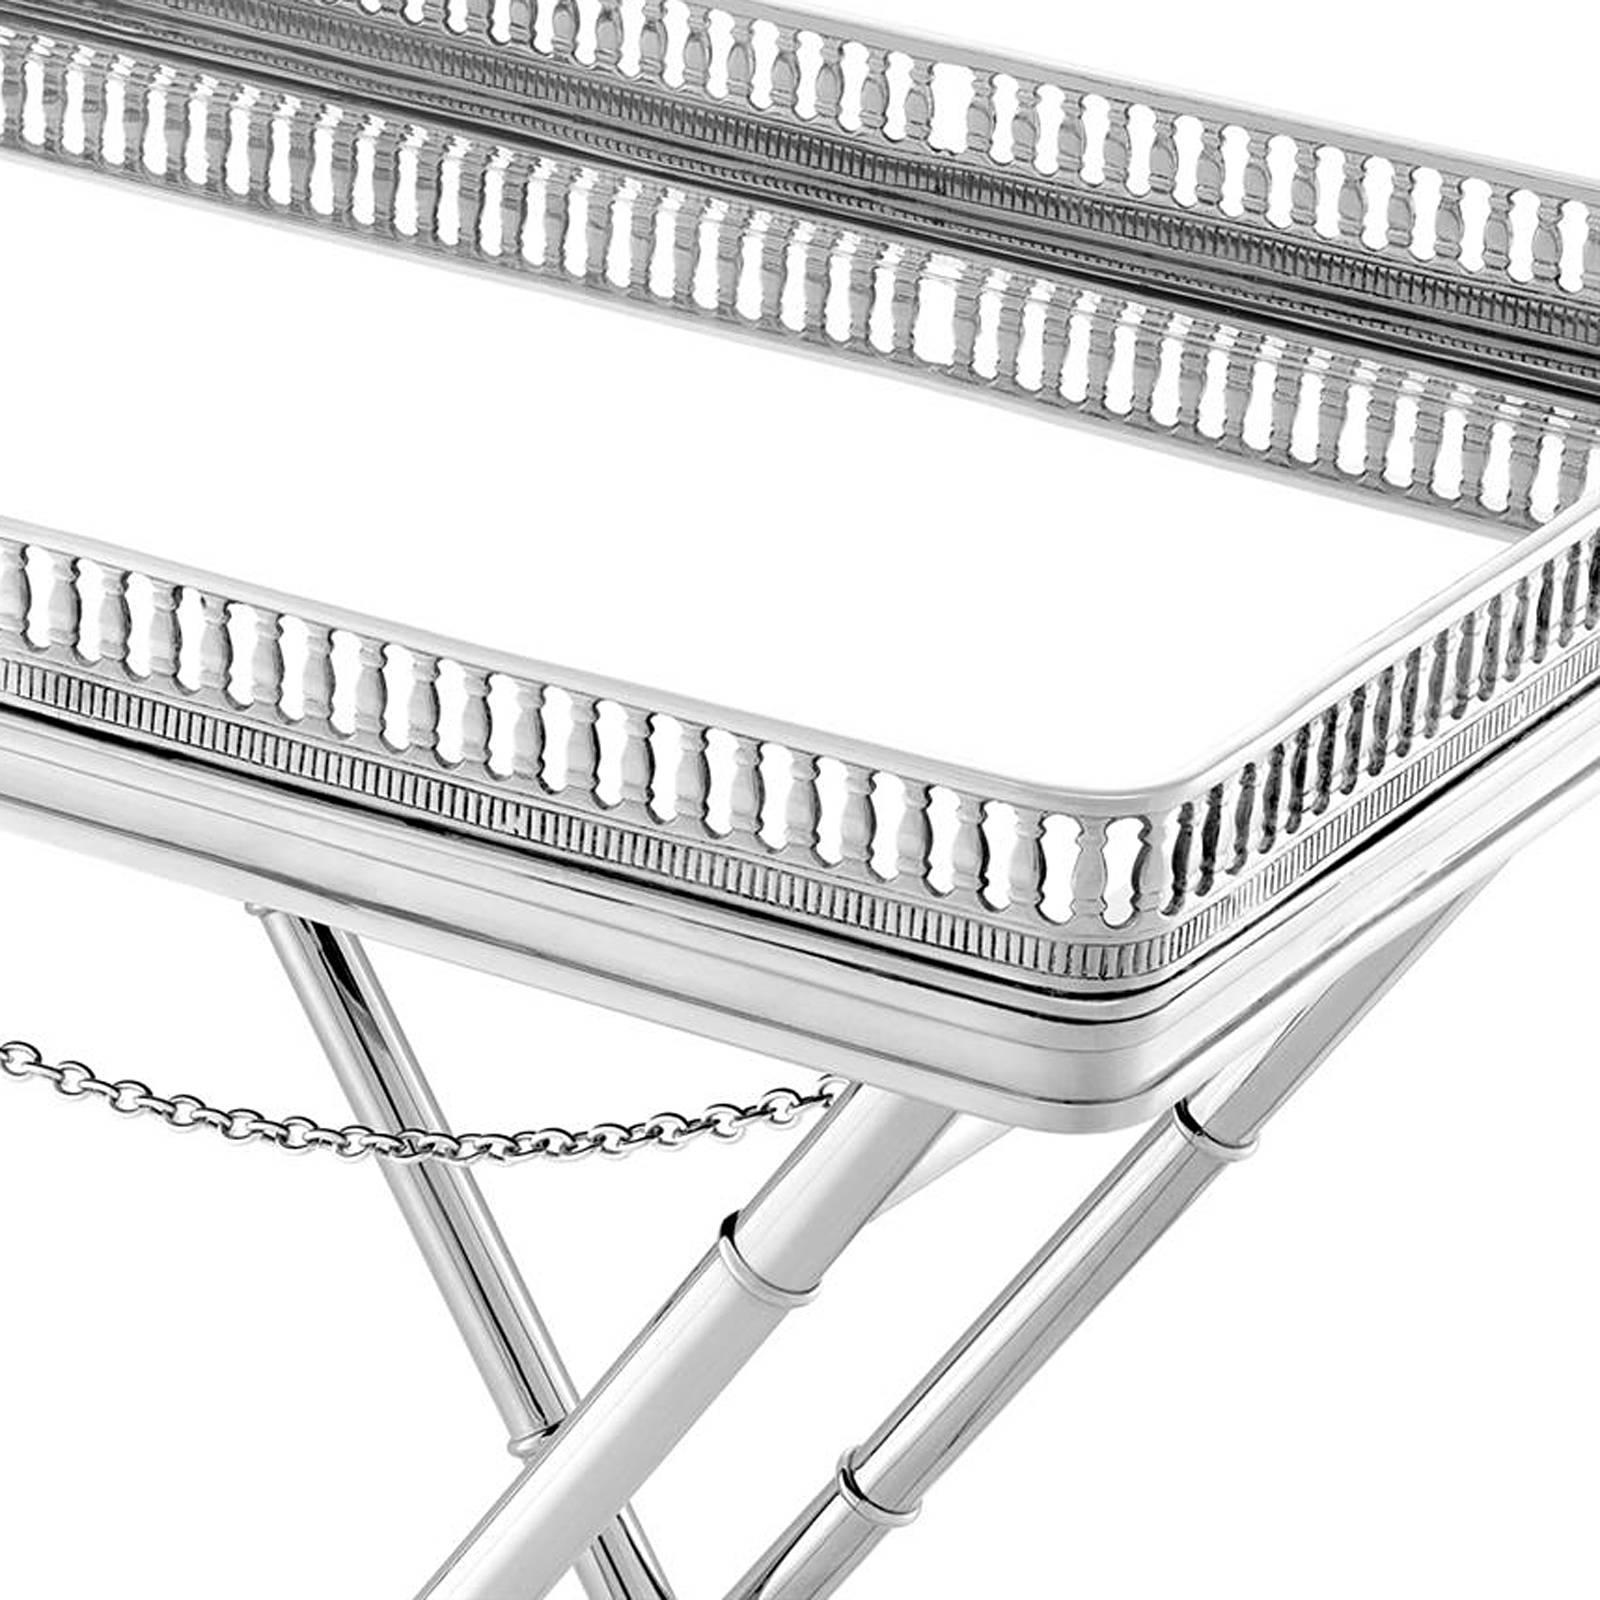 Beveled Chrome Butler Tray in Polished Nickel Finish and Mirror Glass